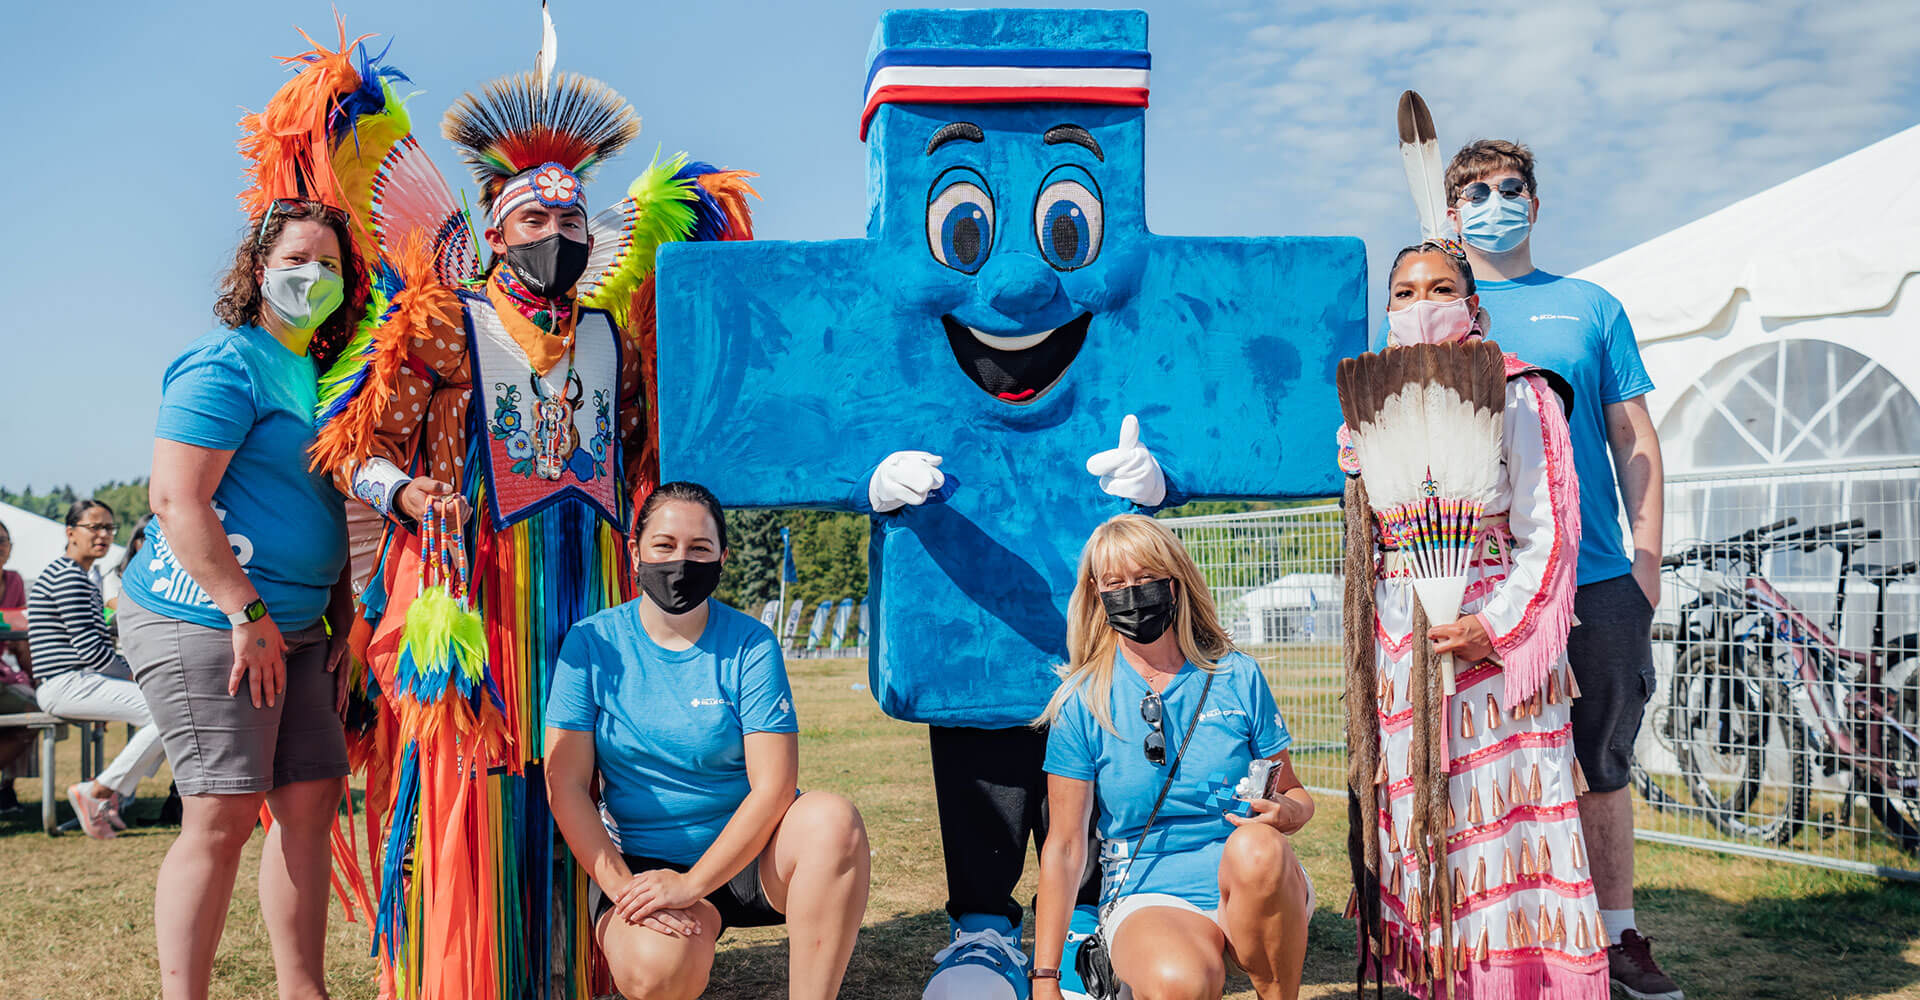 Alberta Blue Cross mascot, Big Blue is standing with two First Nations dancers dressed in vibrant colours. There are members of the Alberta Blue Cross Street Team with them.